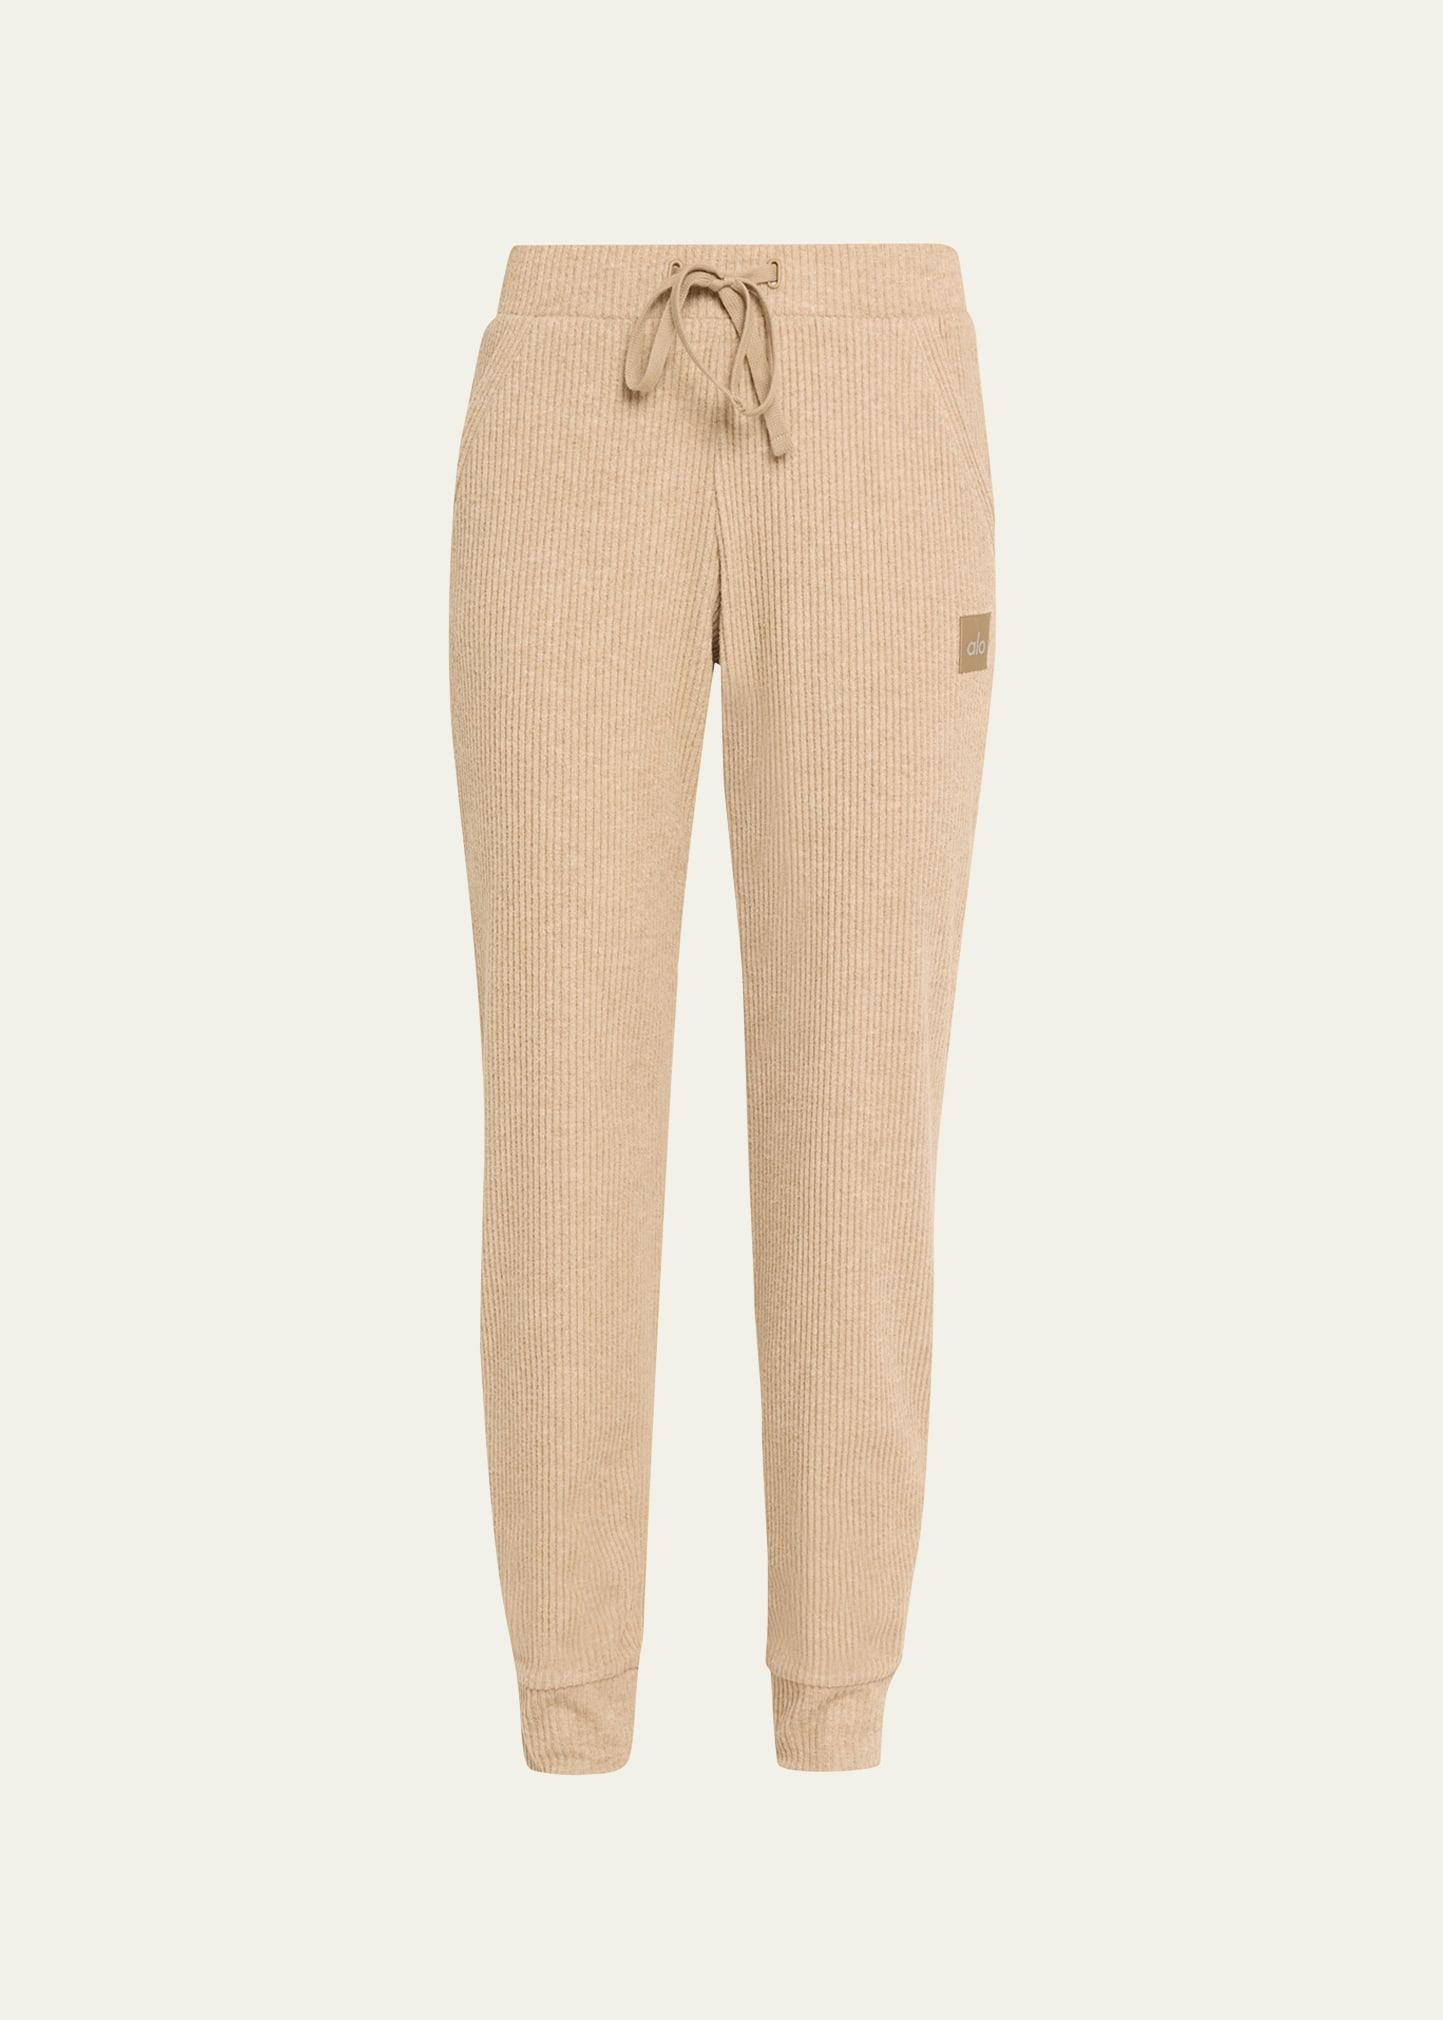 Muse Sweatpant - Gravel Heather  Sweatpants, Fashion joggers, Shopping  outfit